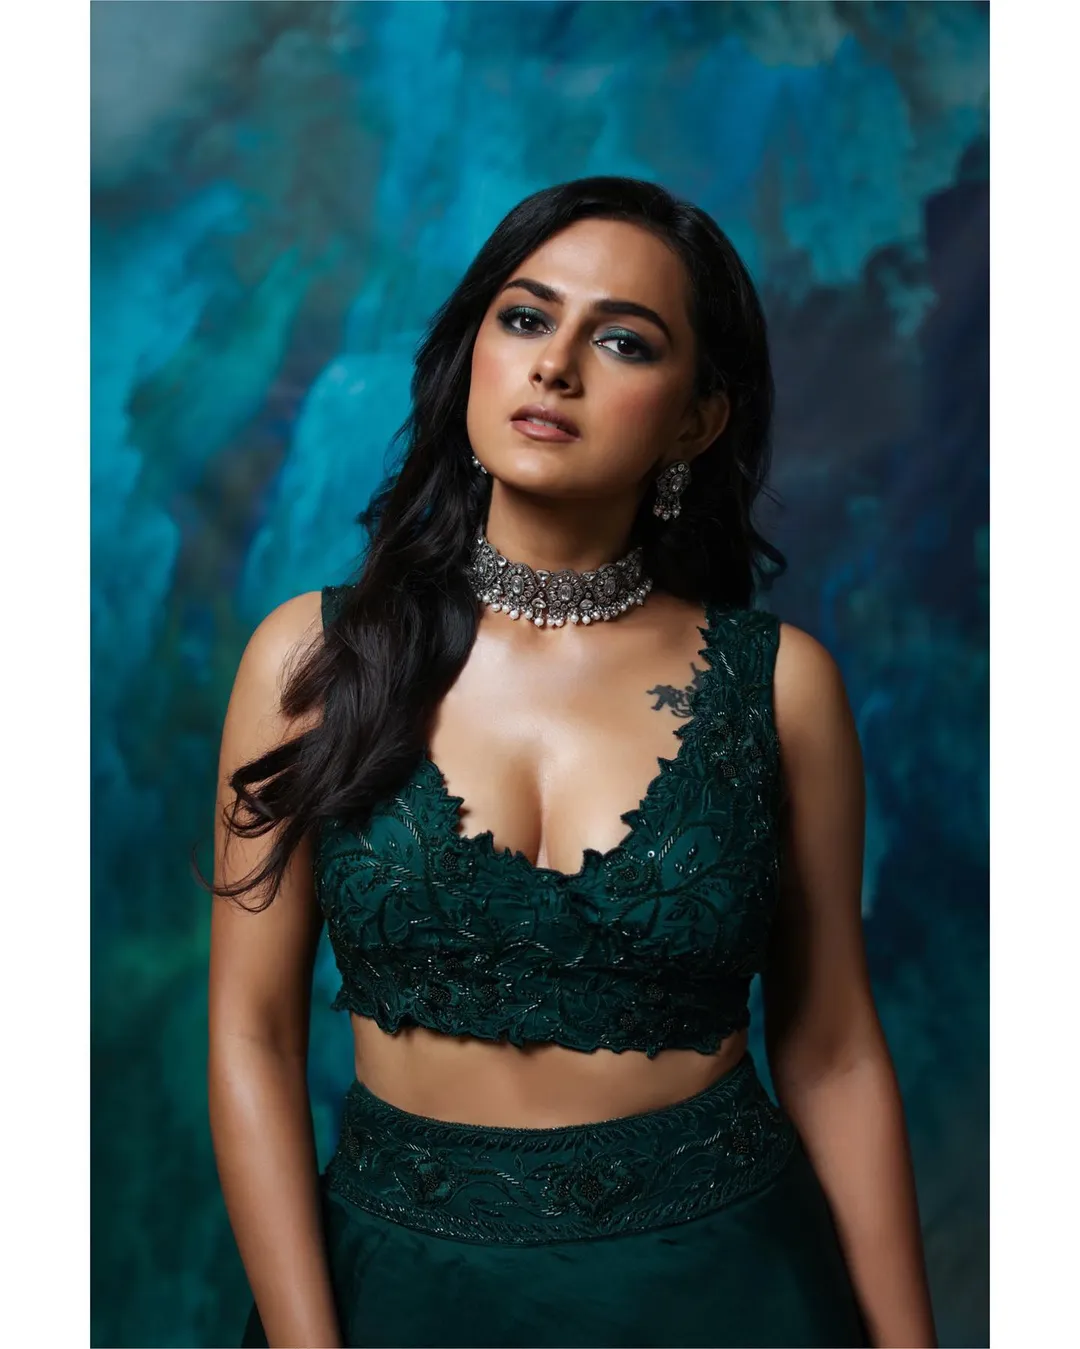 Actor Shraddha Srinathâ€™s Sexy look in a green outfit